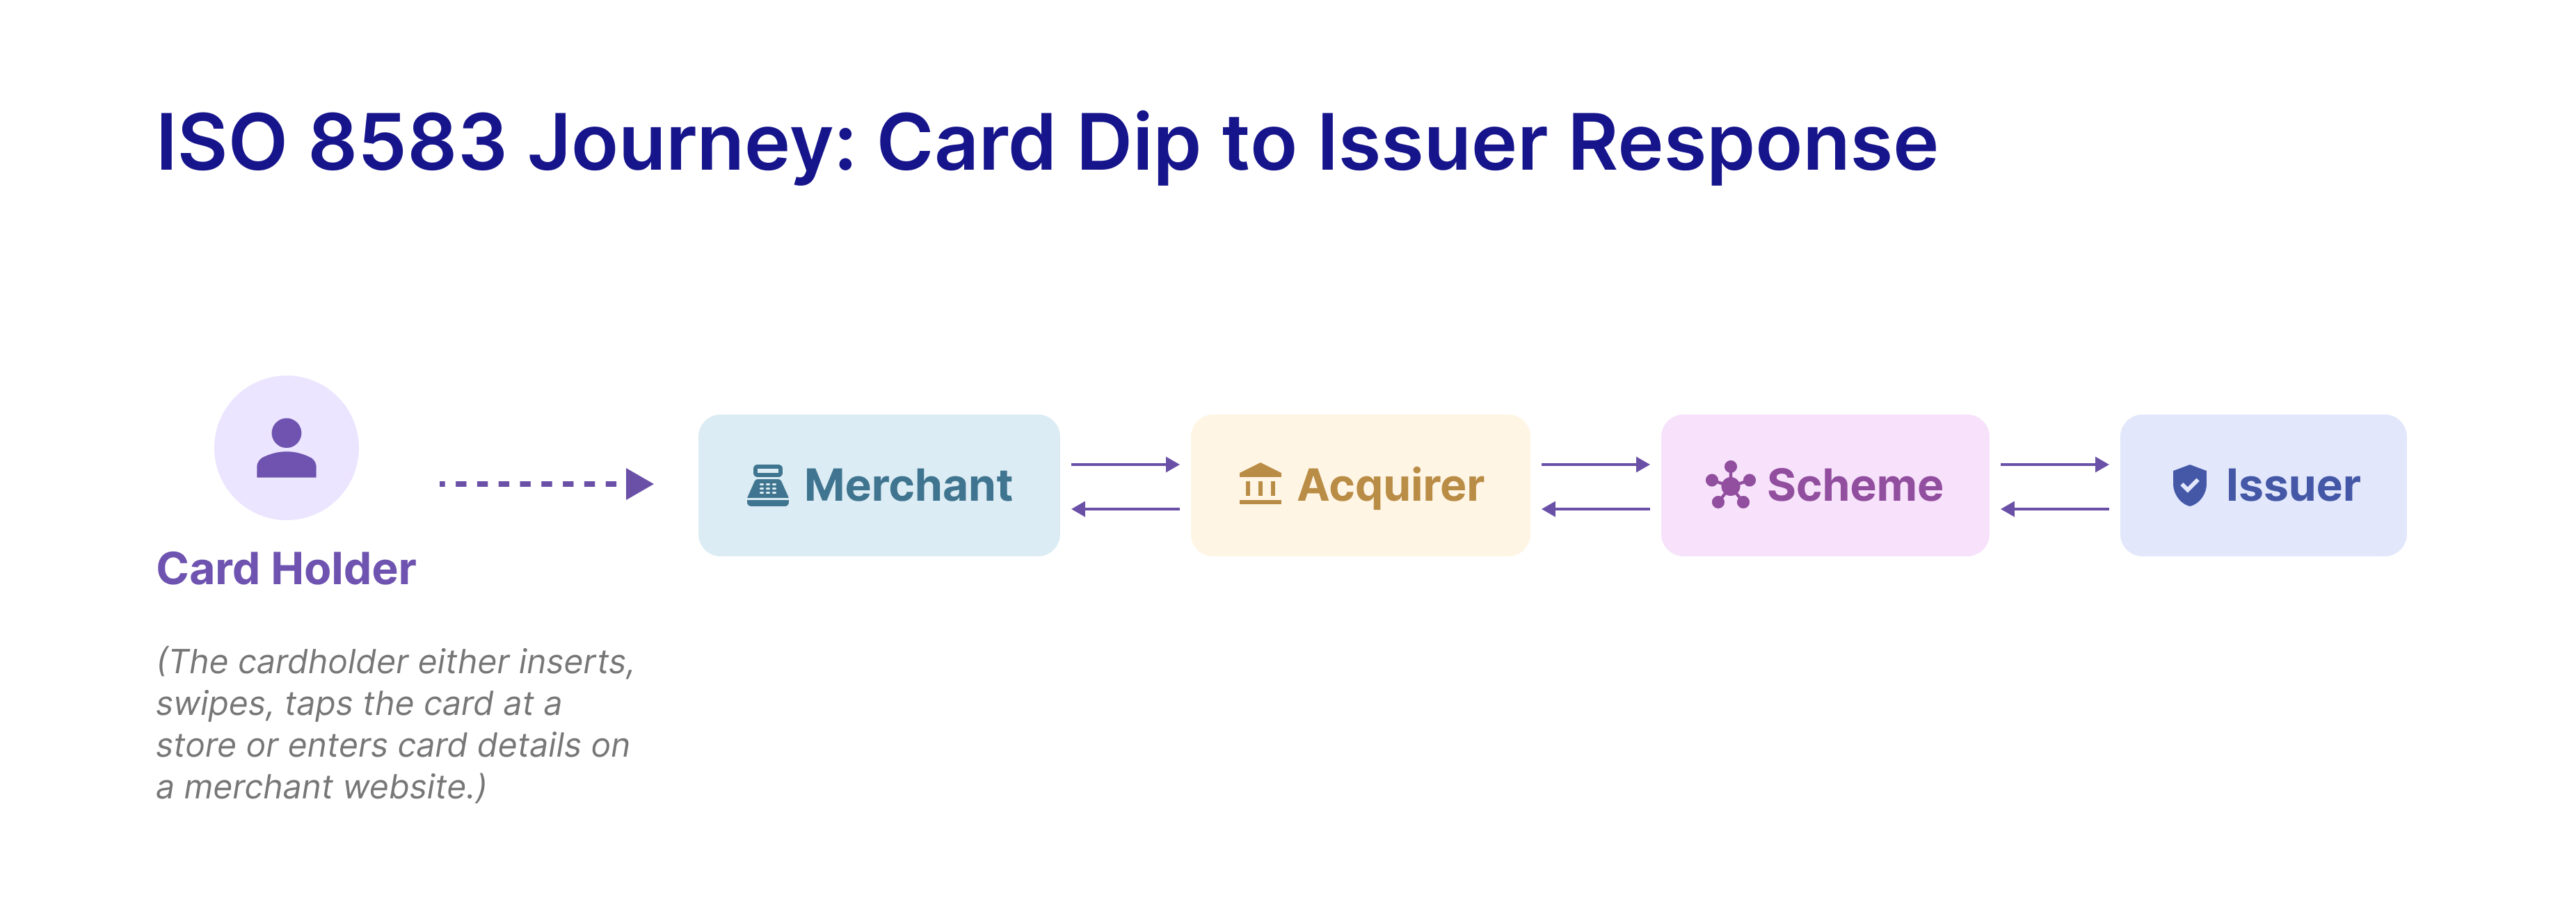 ISO 8583 Card Payment Journey